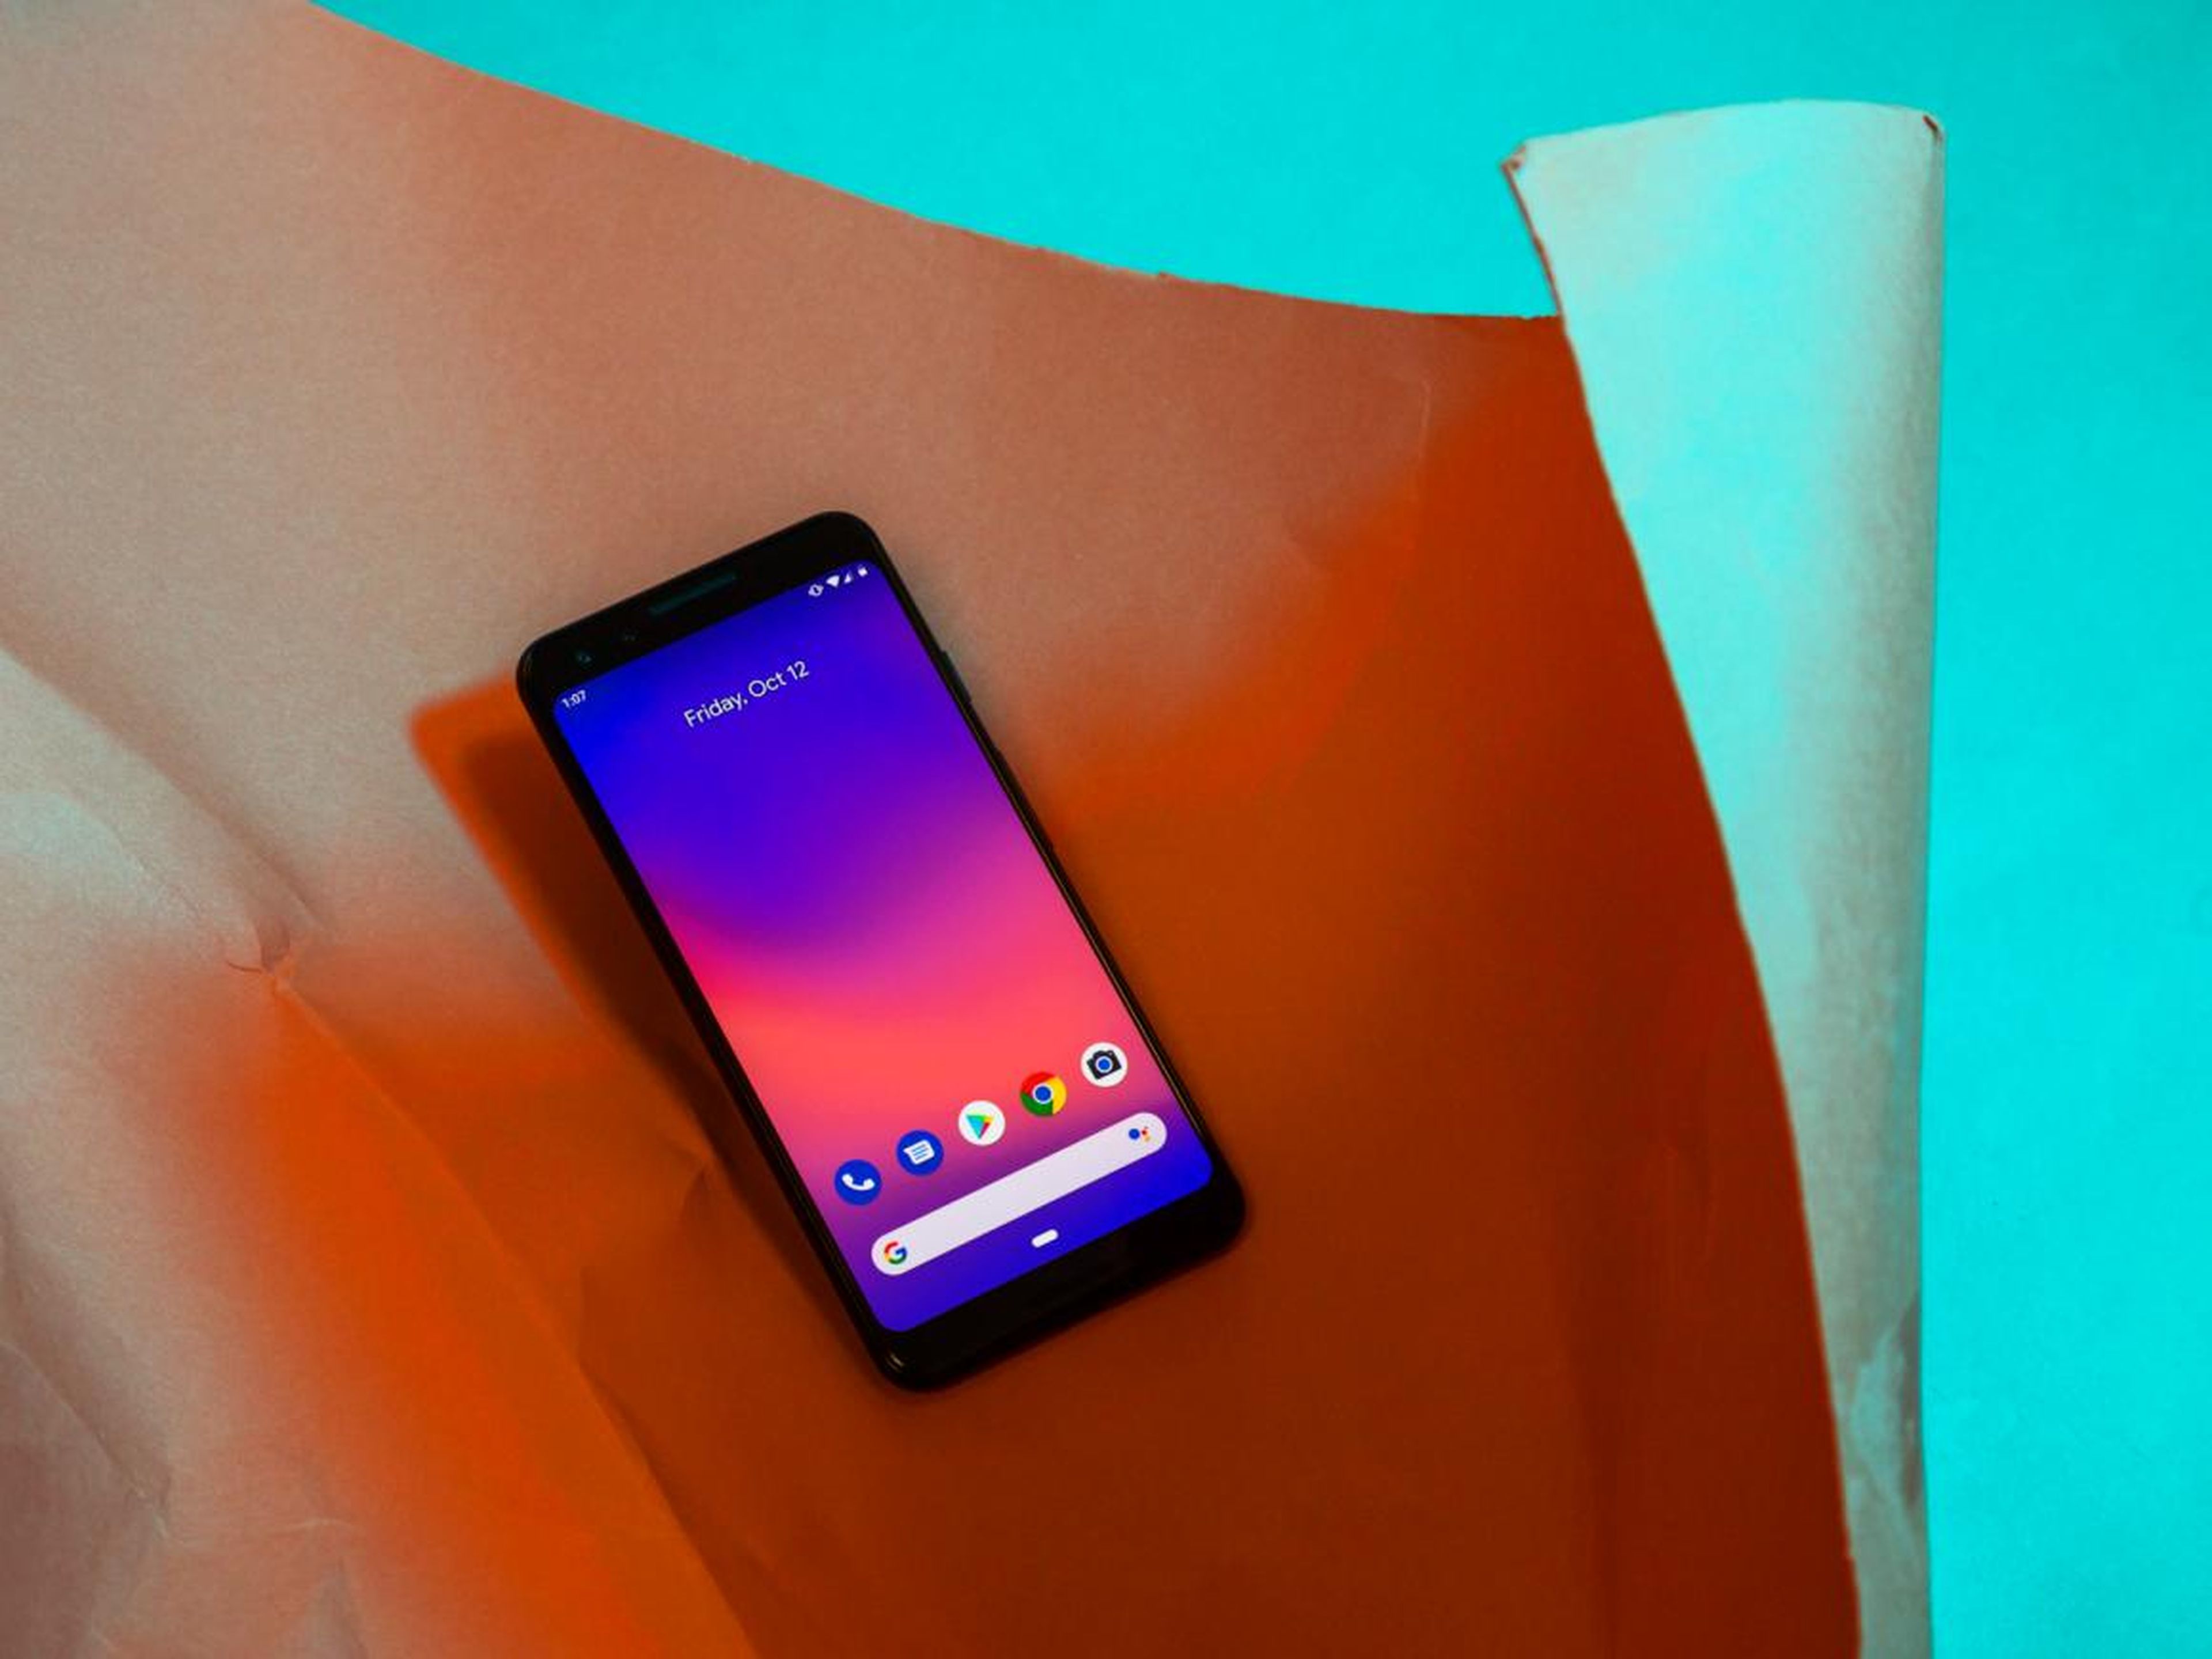 Google's Pixel 3, which debuted in October 2018.